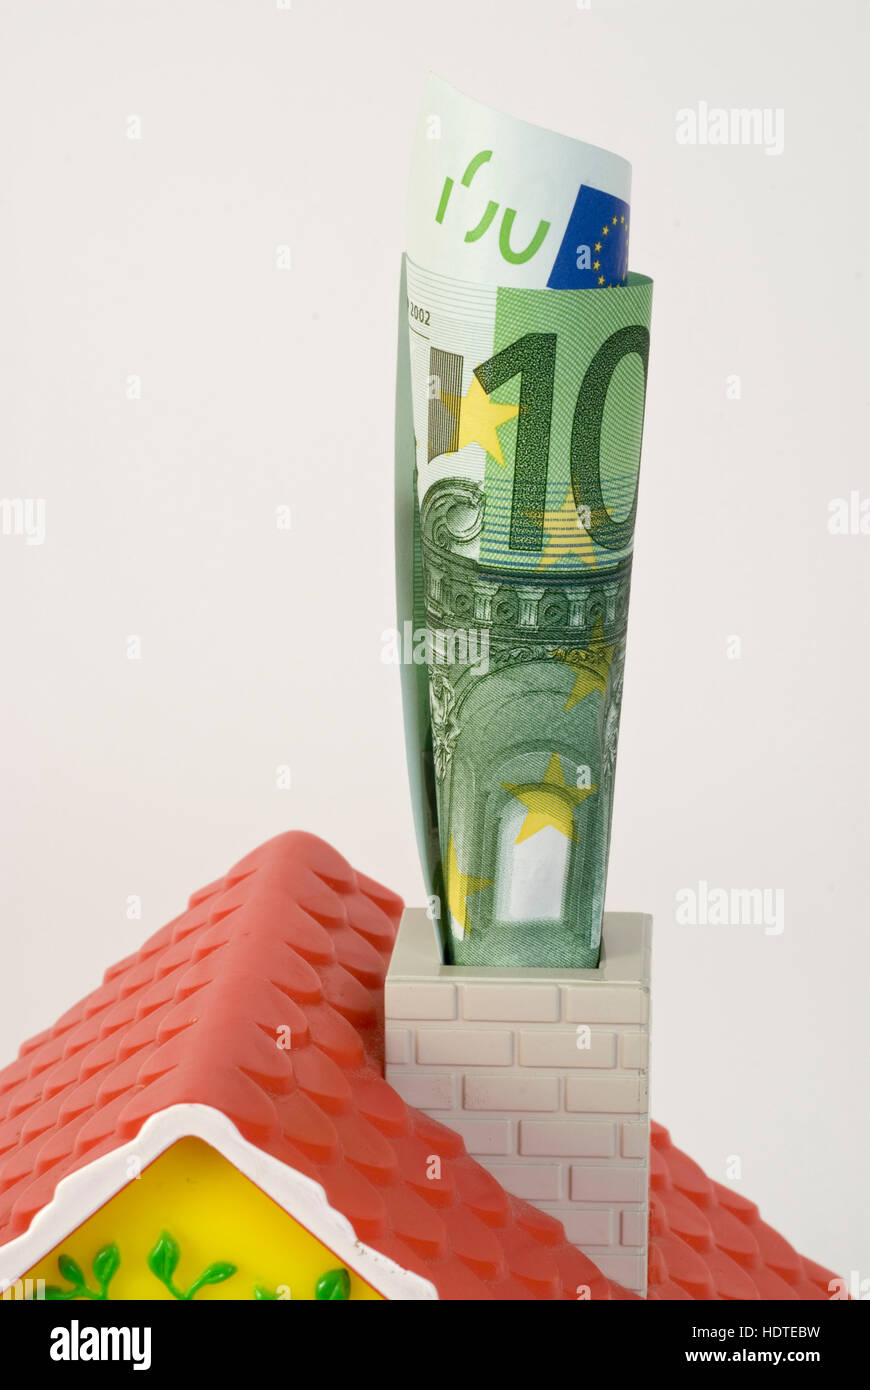 Miniature house with rolled-up banknote in the chimney, symbolic picture for saving energy Stock Photo